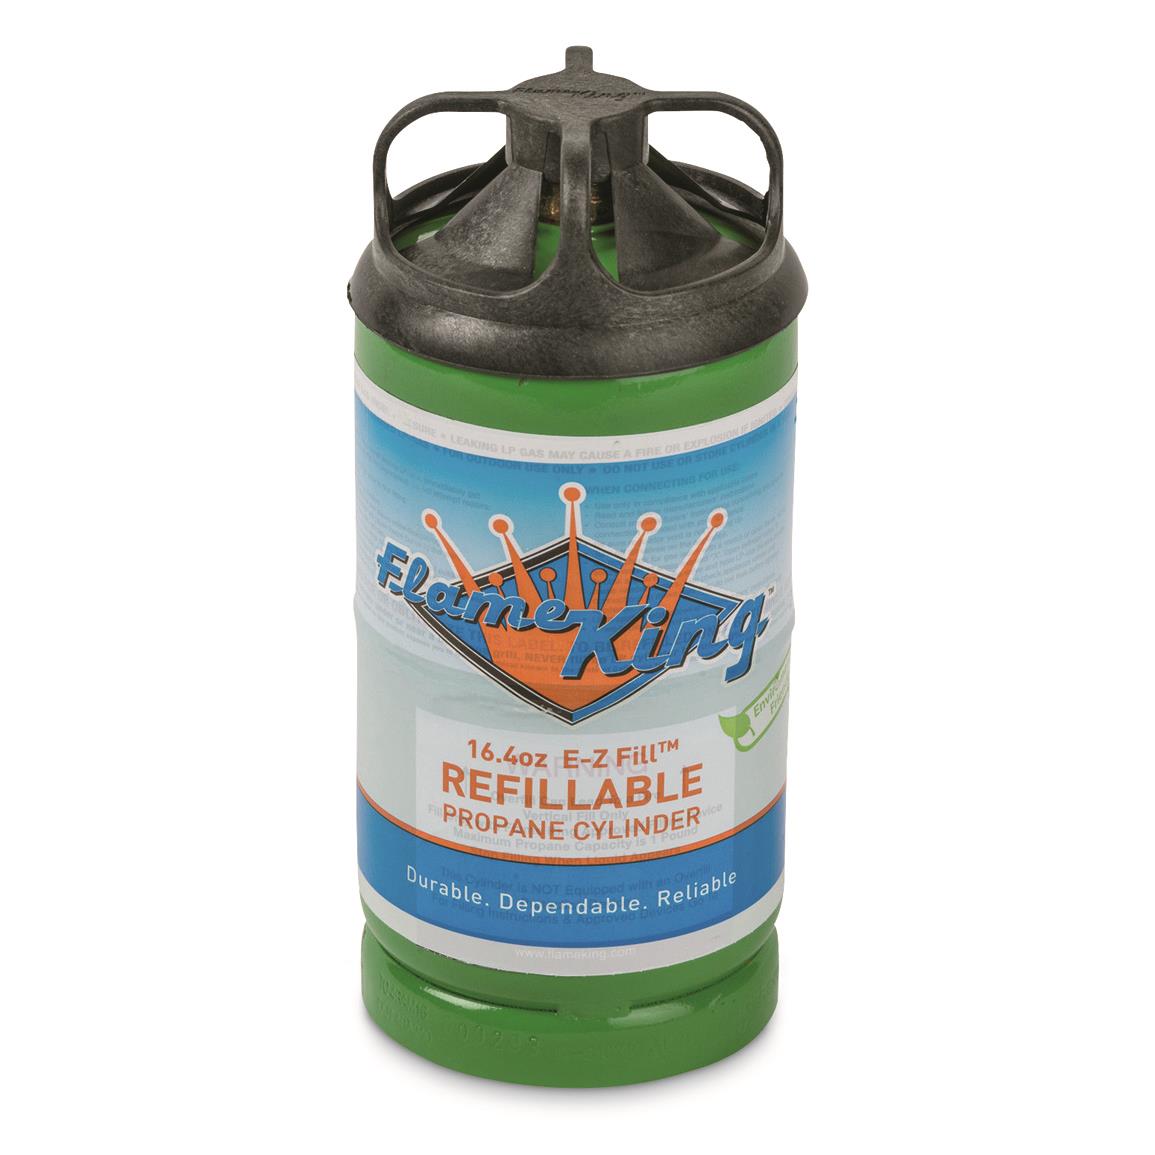 Flame King 1 lb. Refillable Propane Cylinder